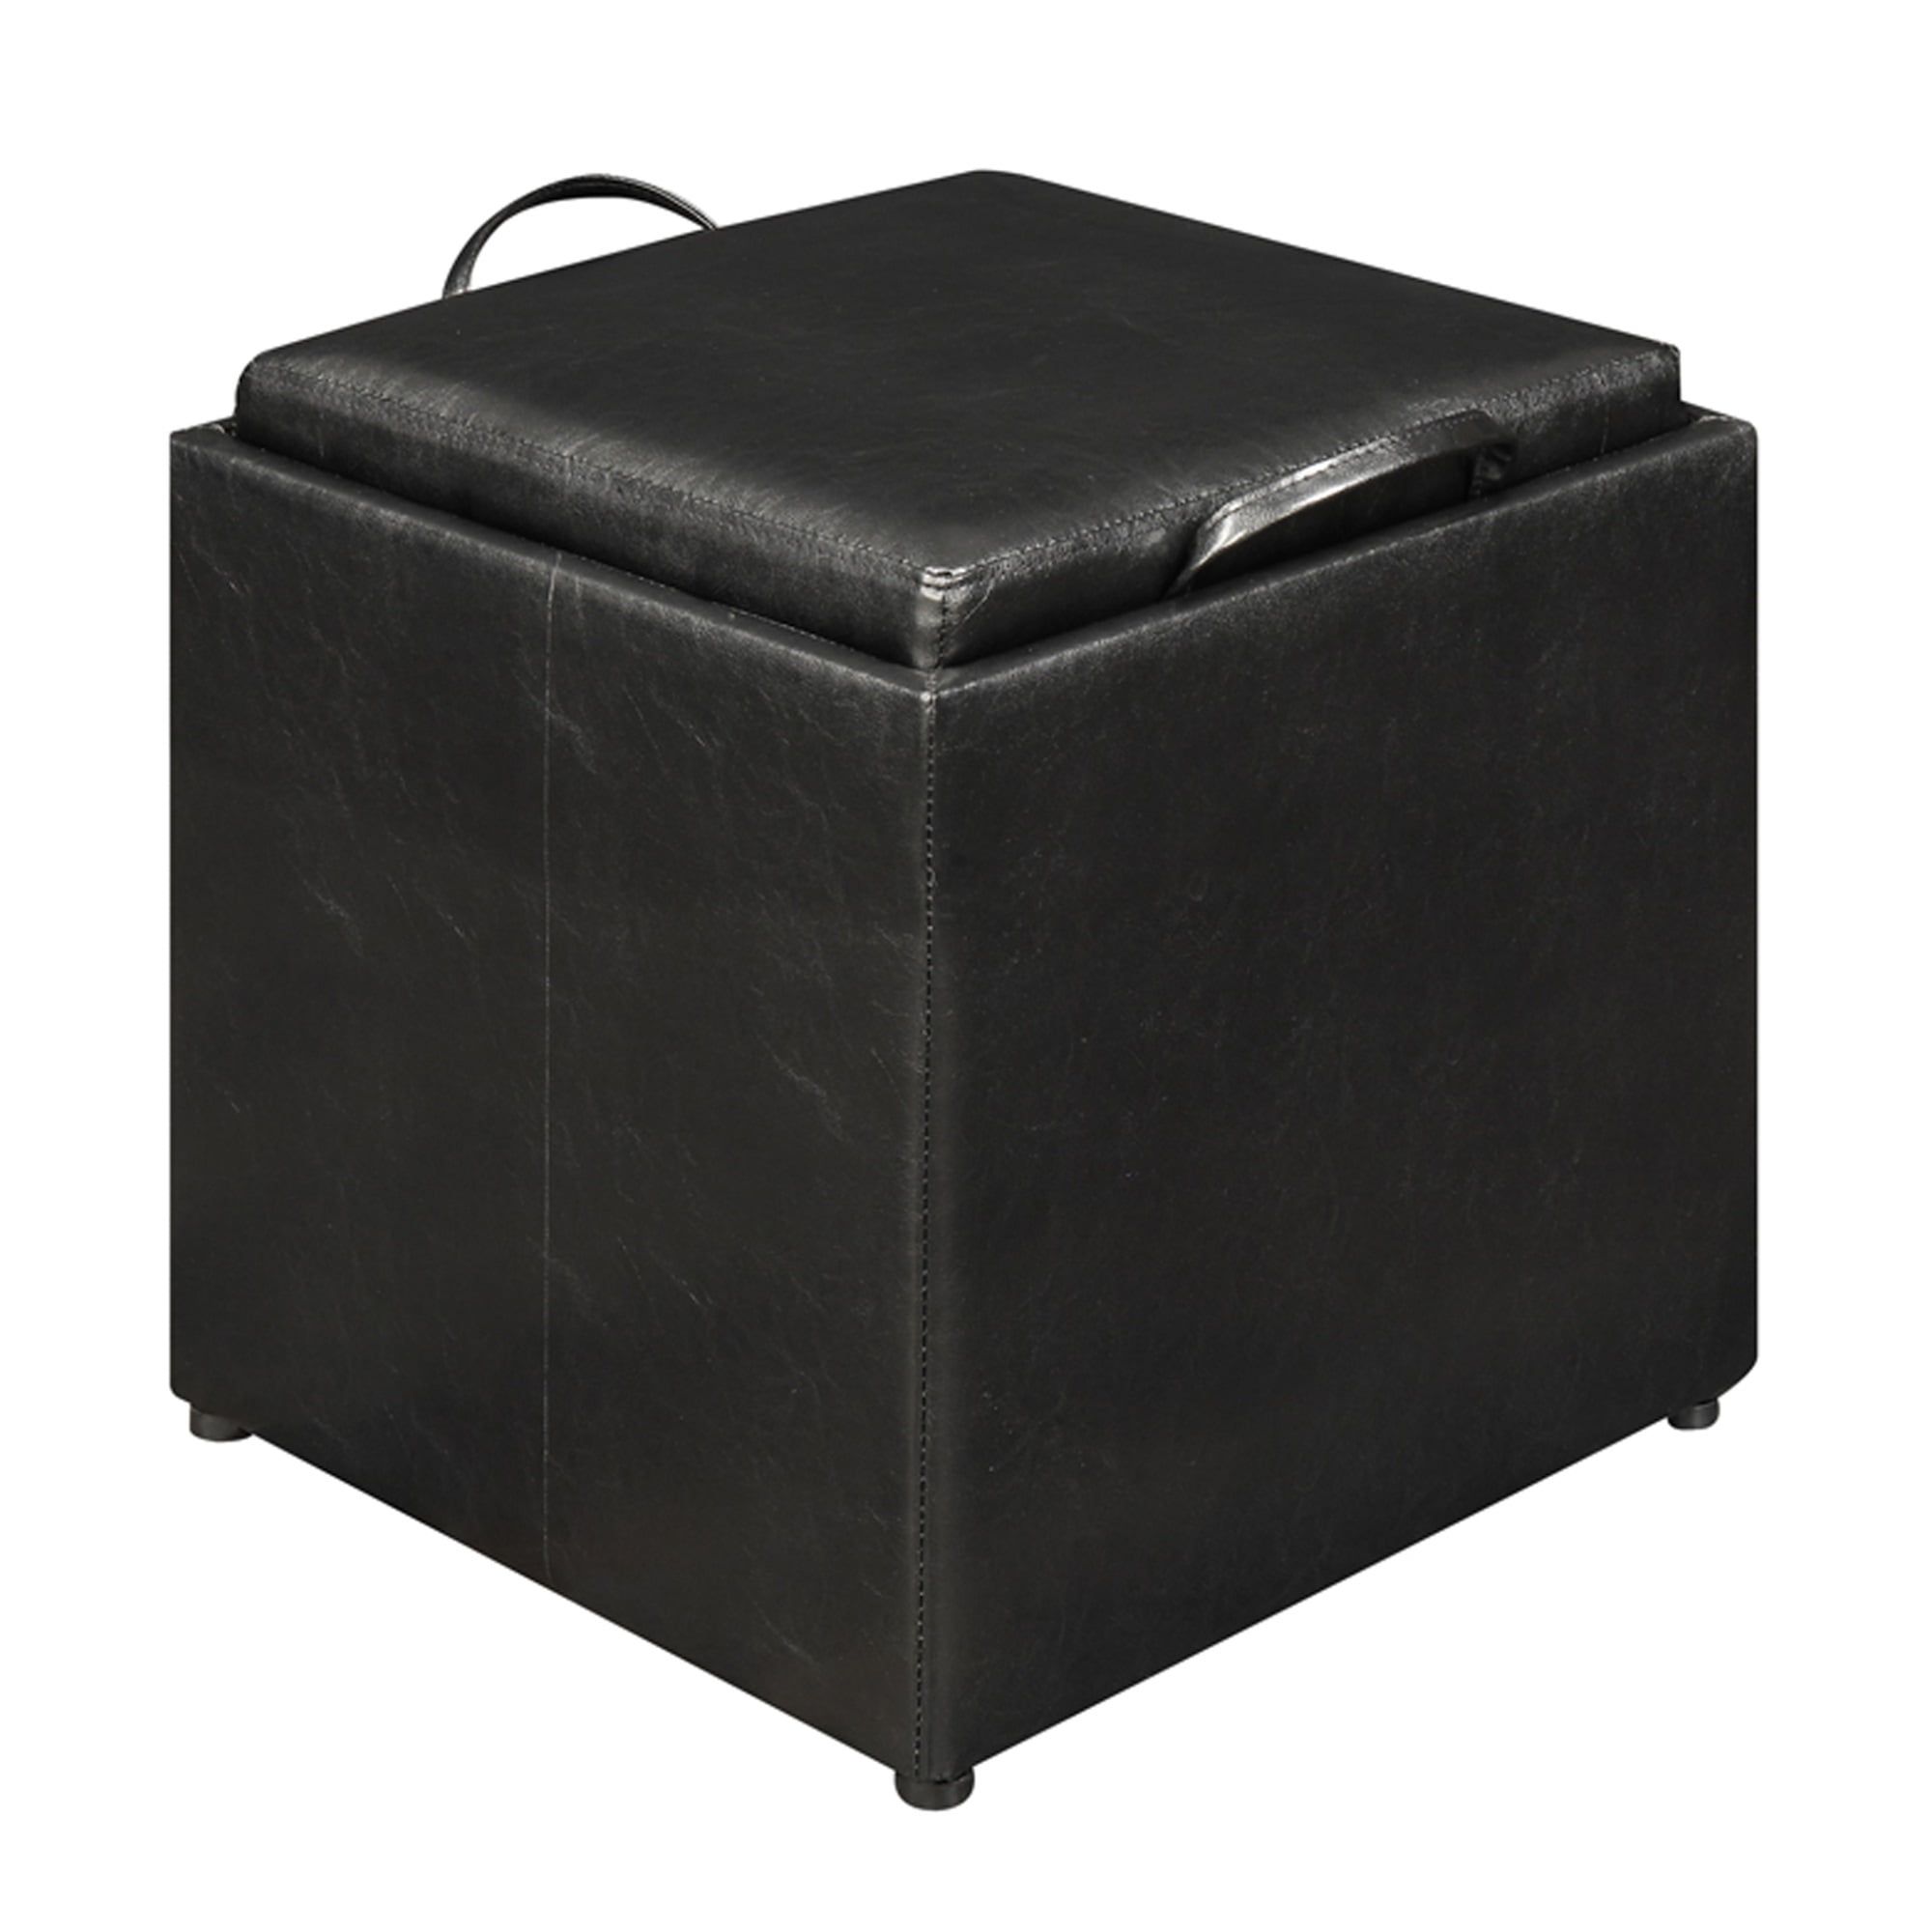 Convenience Concepts Designs4comfort Park Avenue Single Ottoman With Stool  And Reversible Tray, Espresso Faux Leather – Walmart In Ottomans With Stool And Reversible Tray (View 2 of 15)